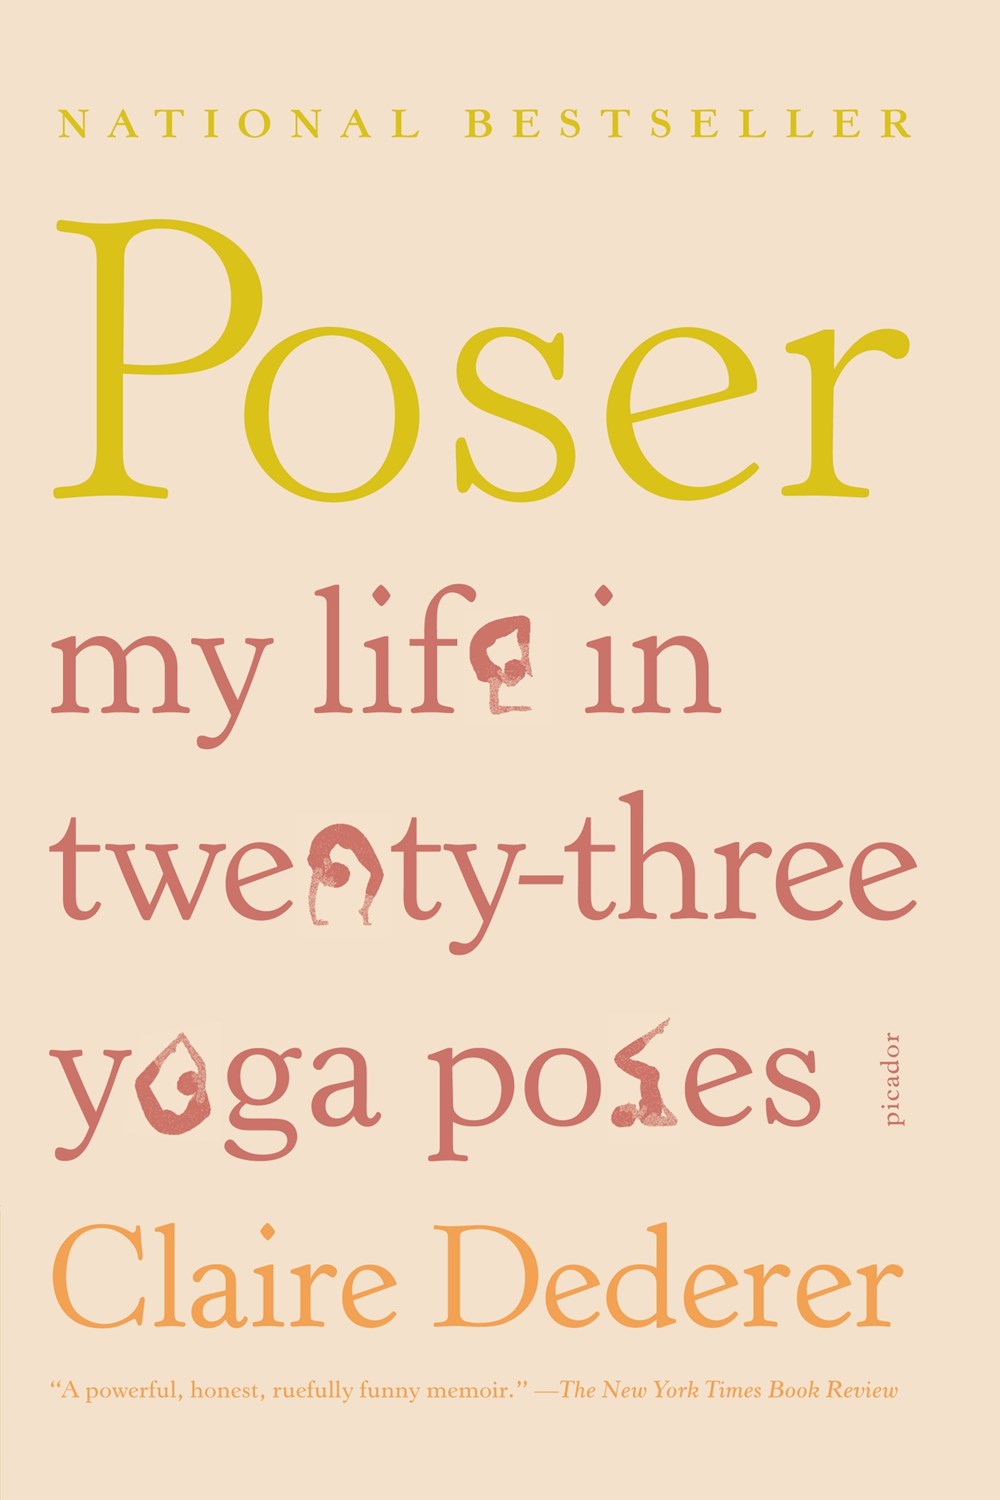 Poser: My Life in Twenty-Three Yoga Poses by Claire Dederer